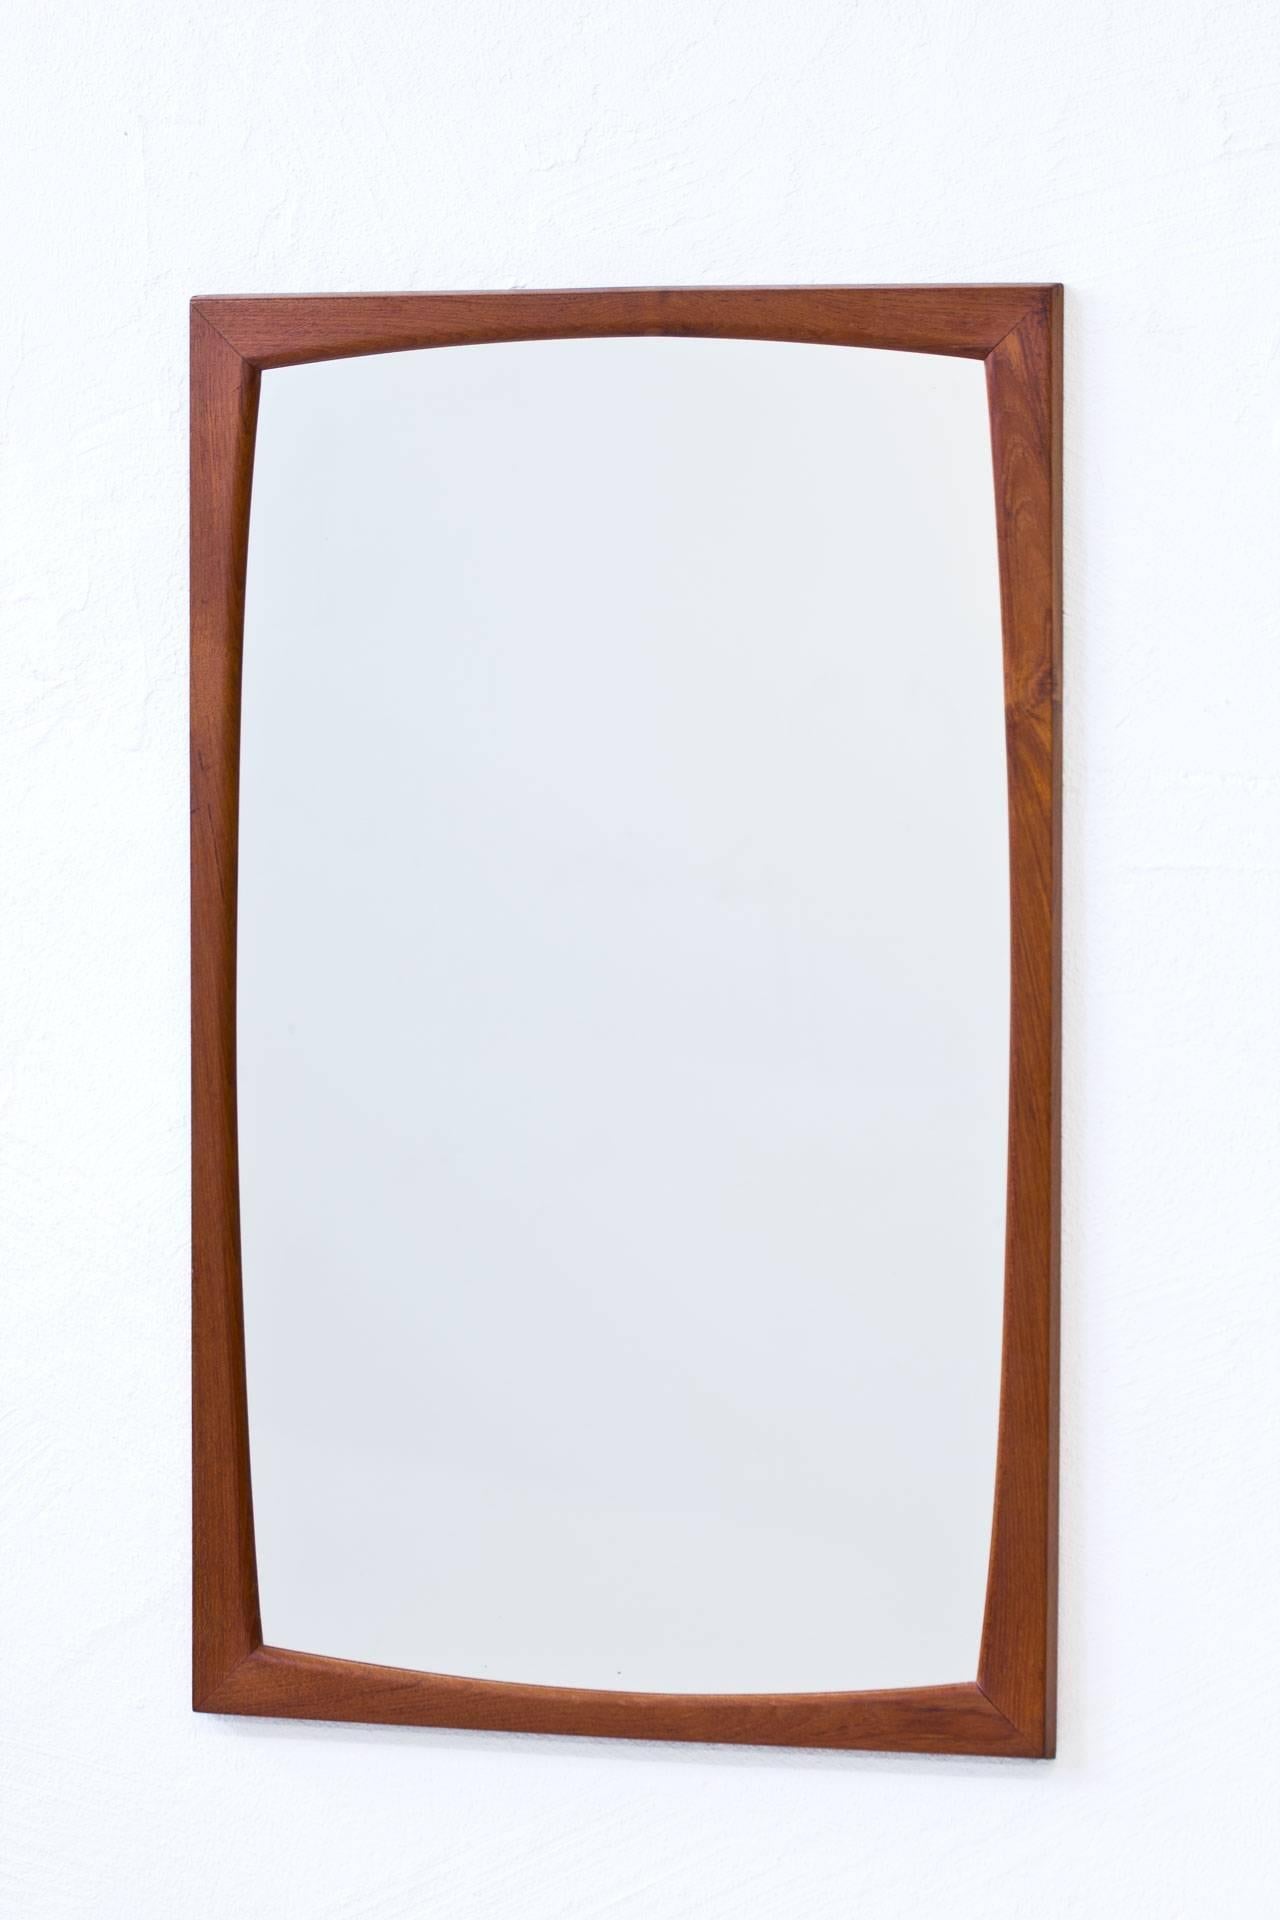 Rectangular wall mirror N° 103 designed by Kai Kristiansen. Produced in Denmark by Aksel Kjaersgaard during the 1950s. Solid teak Frame. Signed on the back.